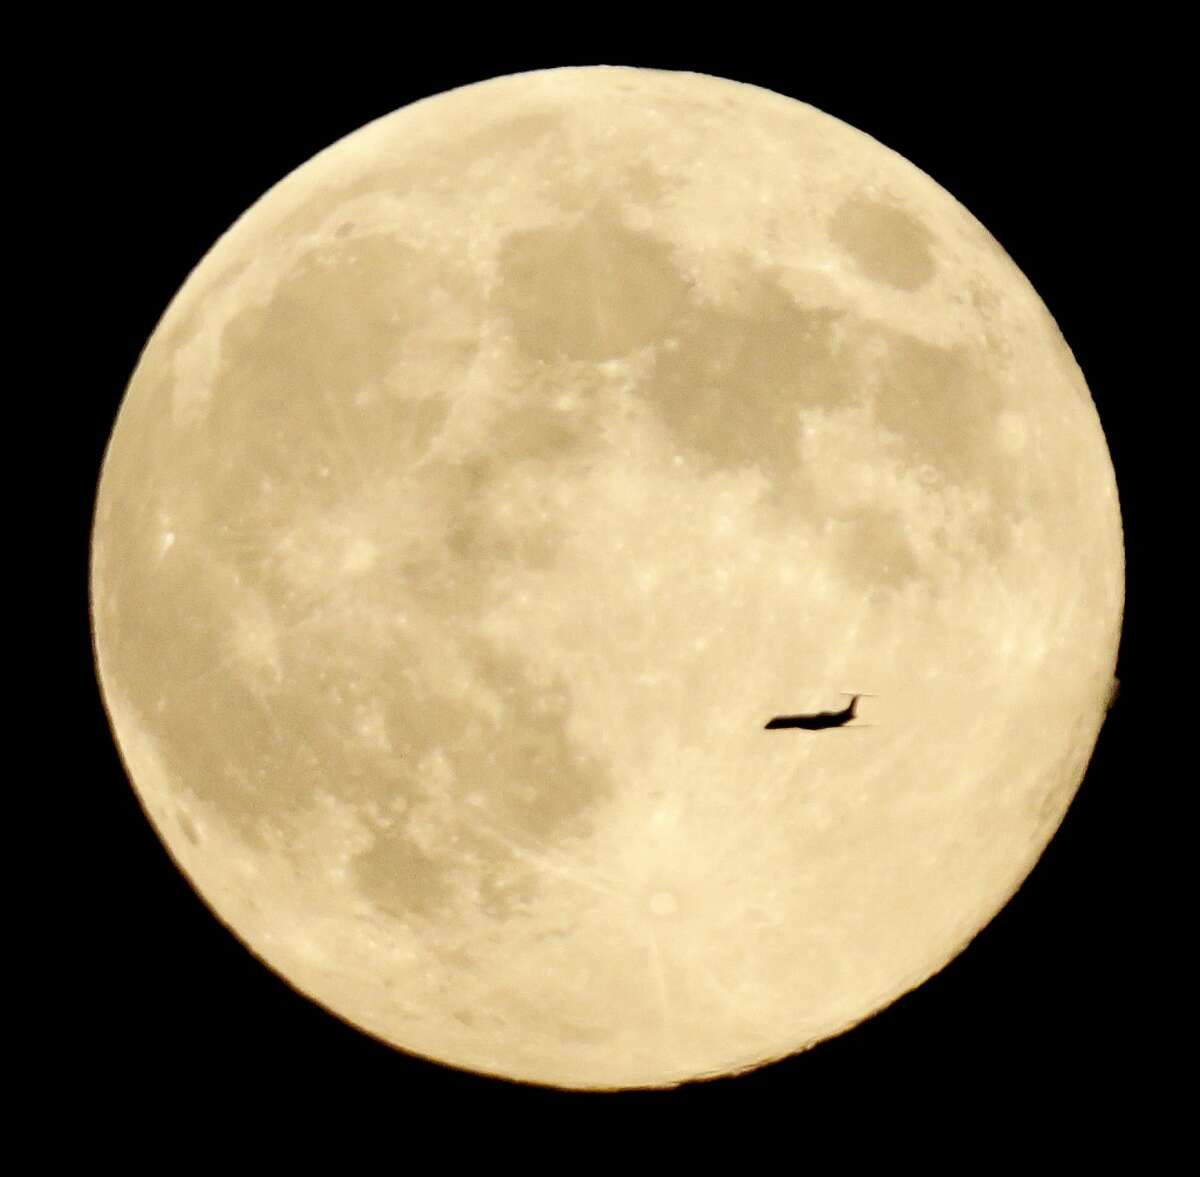 A plane cruises in front of the moon in its full stage under a phenomenon called the blue moon, as seen from West Orange, N.J., Tuesday, Aug. 20, 2013. (AP Photo/Julio Cortez)